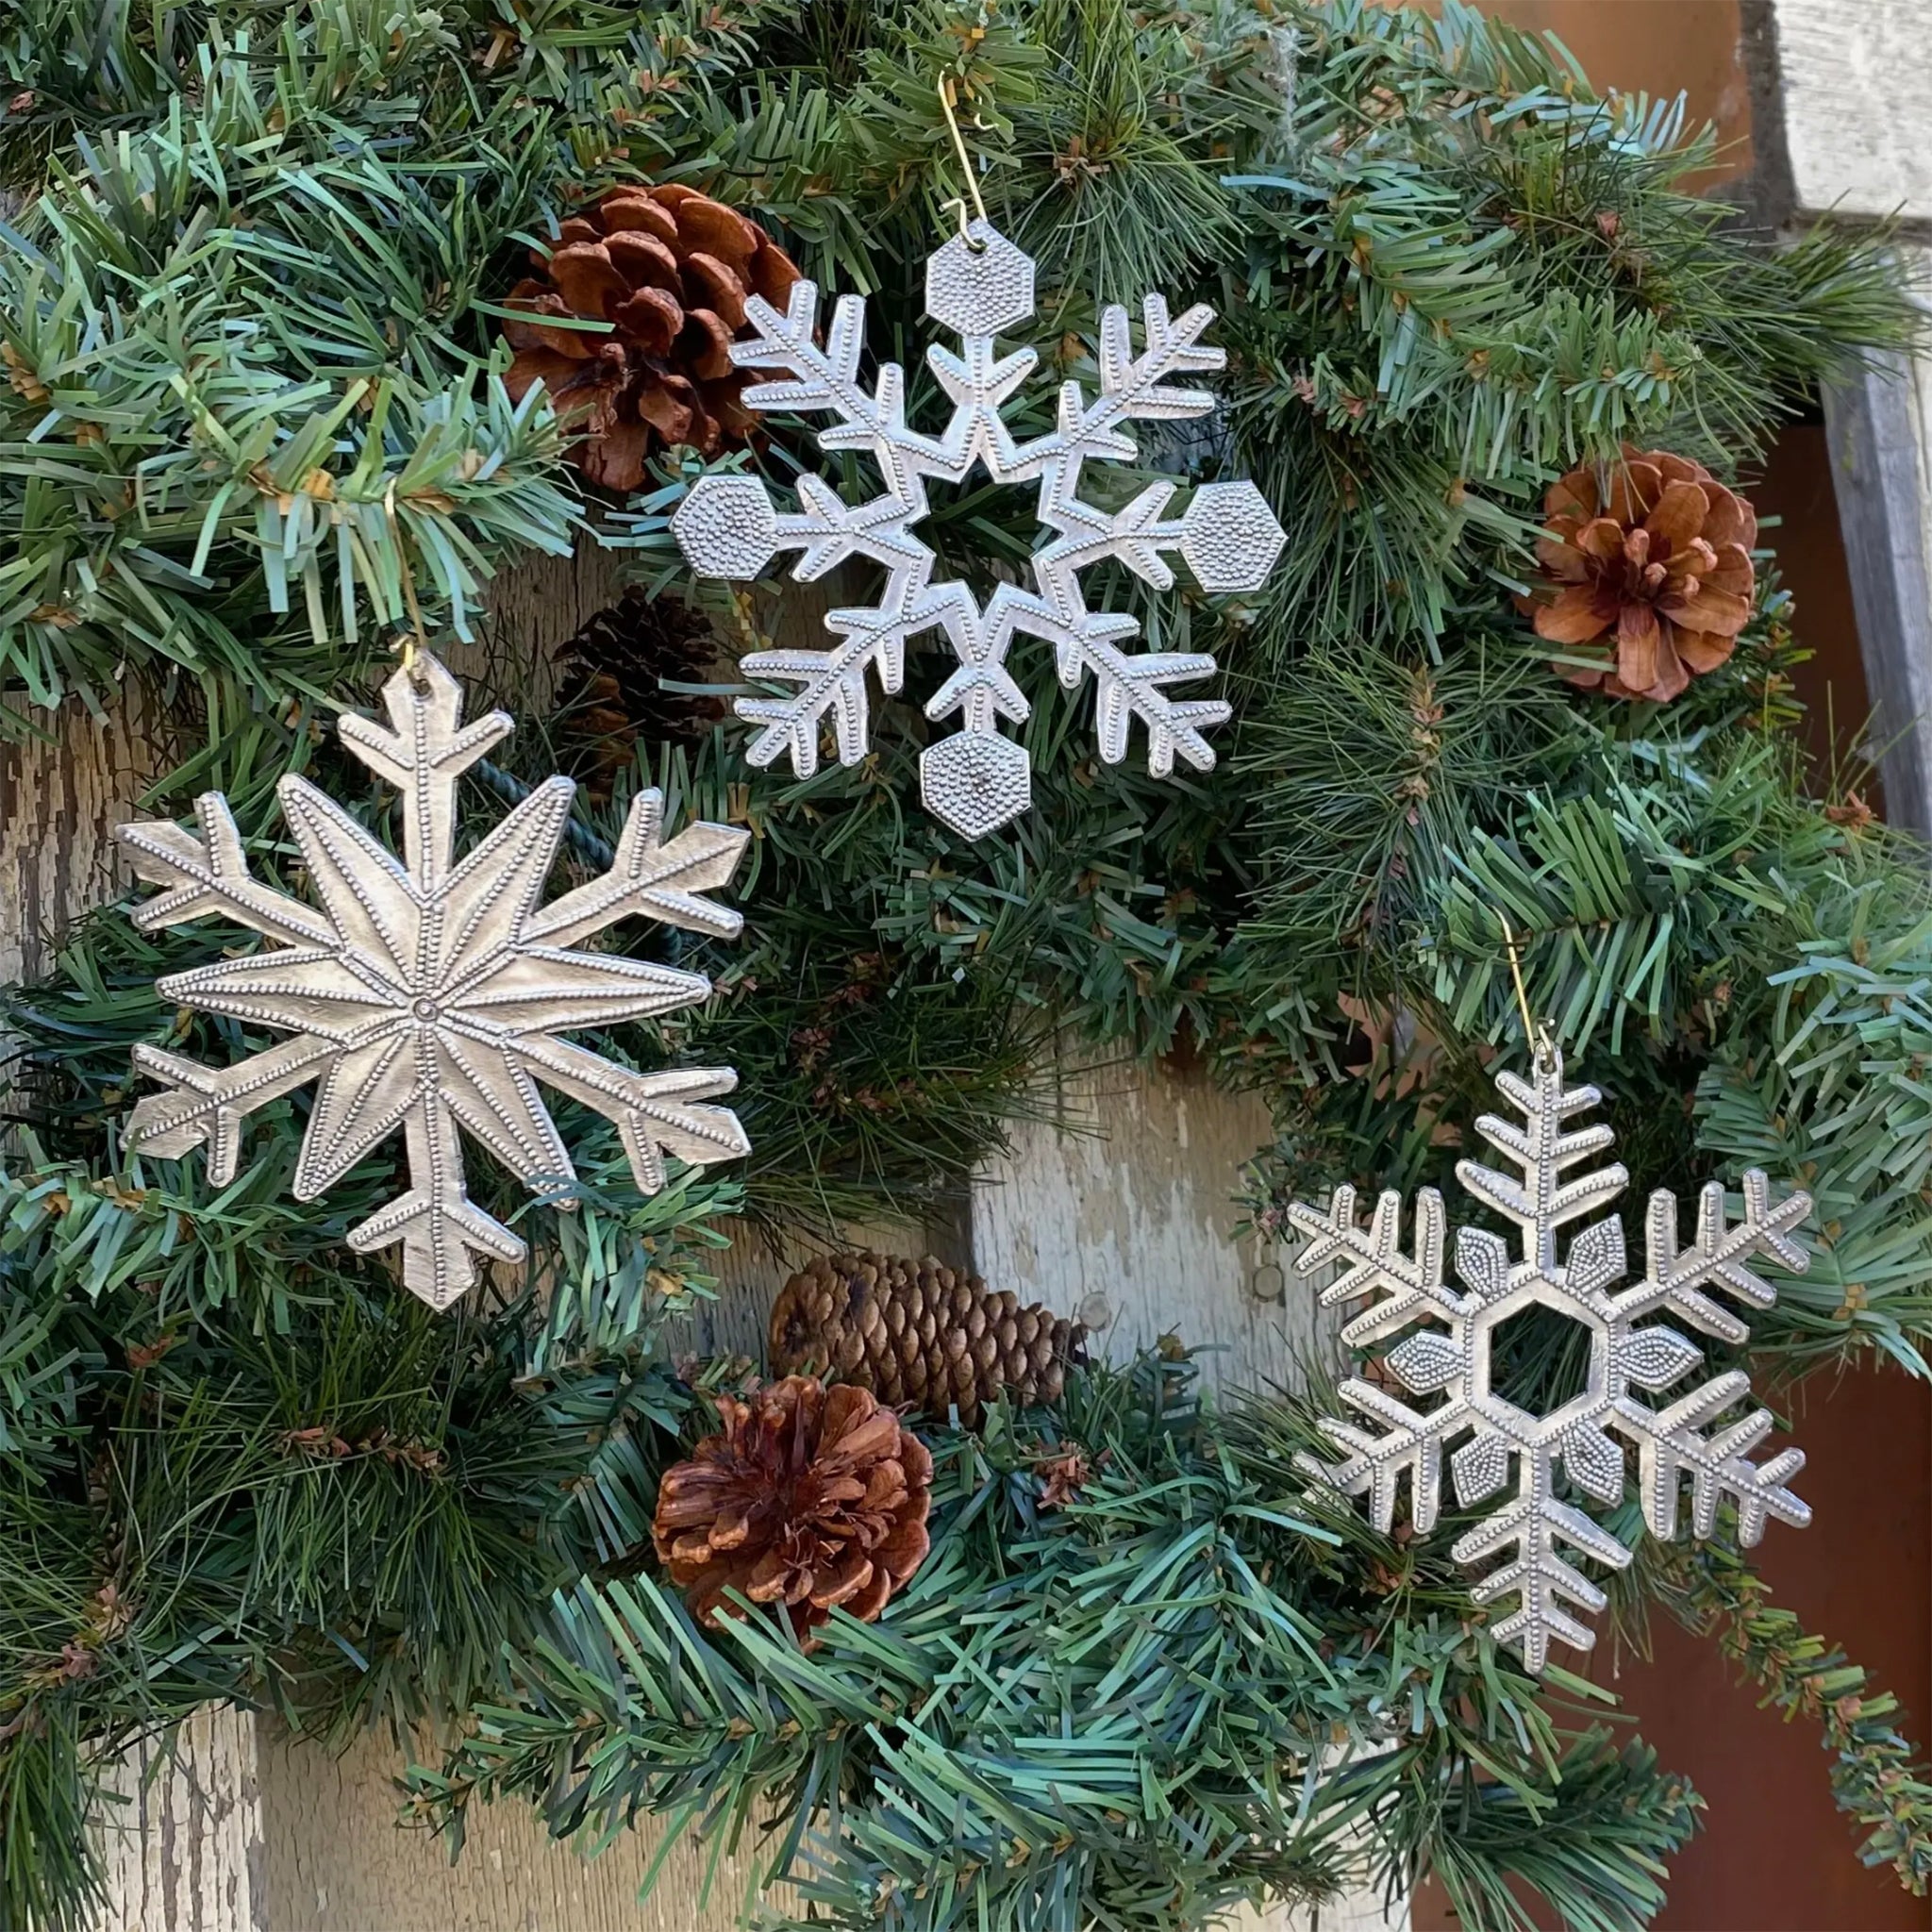 Recycled Metal Snowflake Ornament